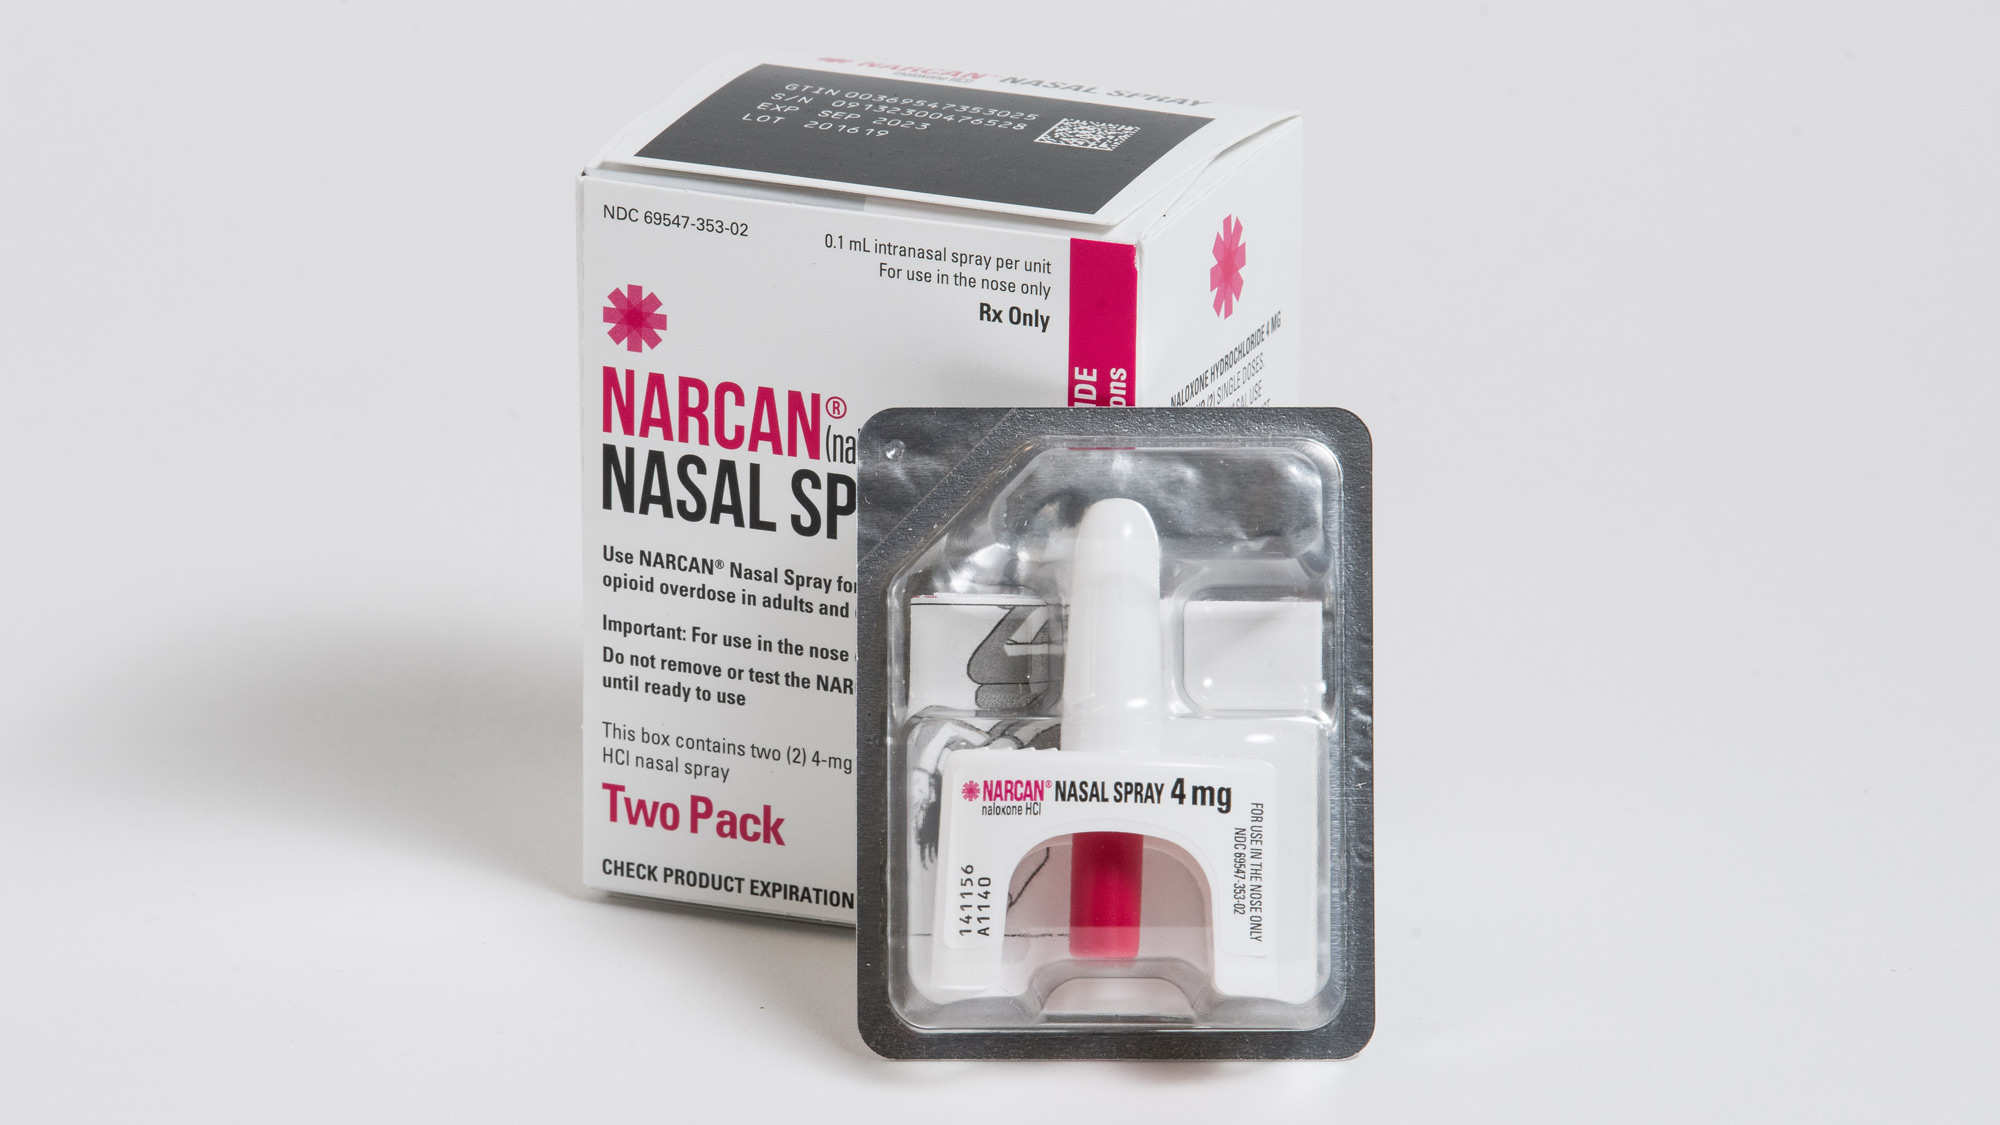 Narcan a live saving drug you can carry to prevent opioid overdoses